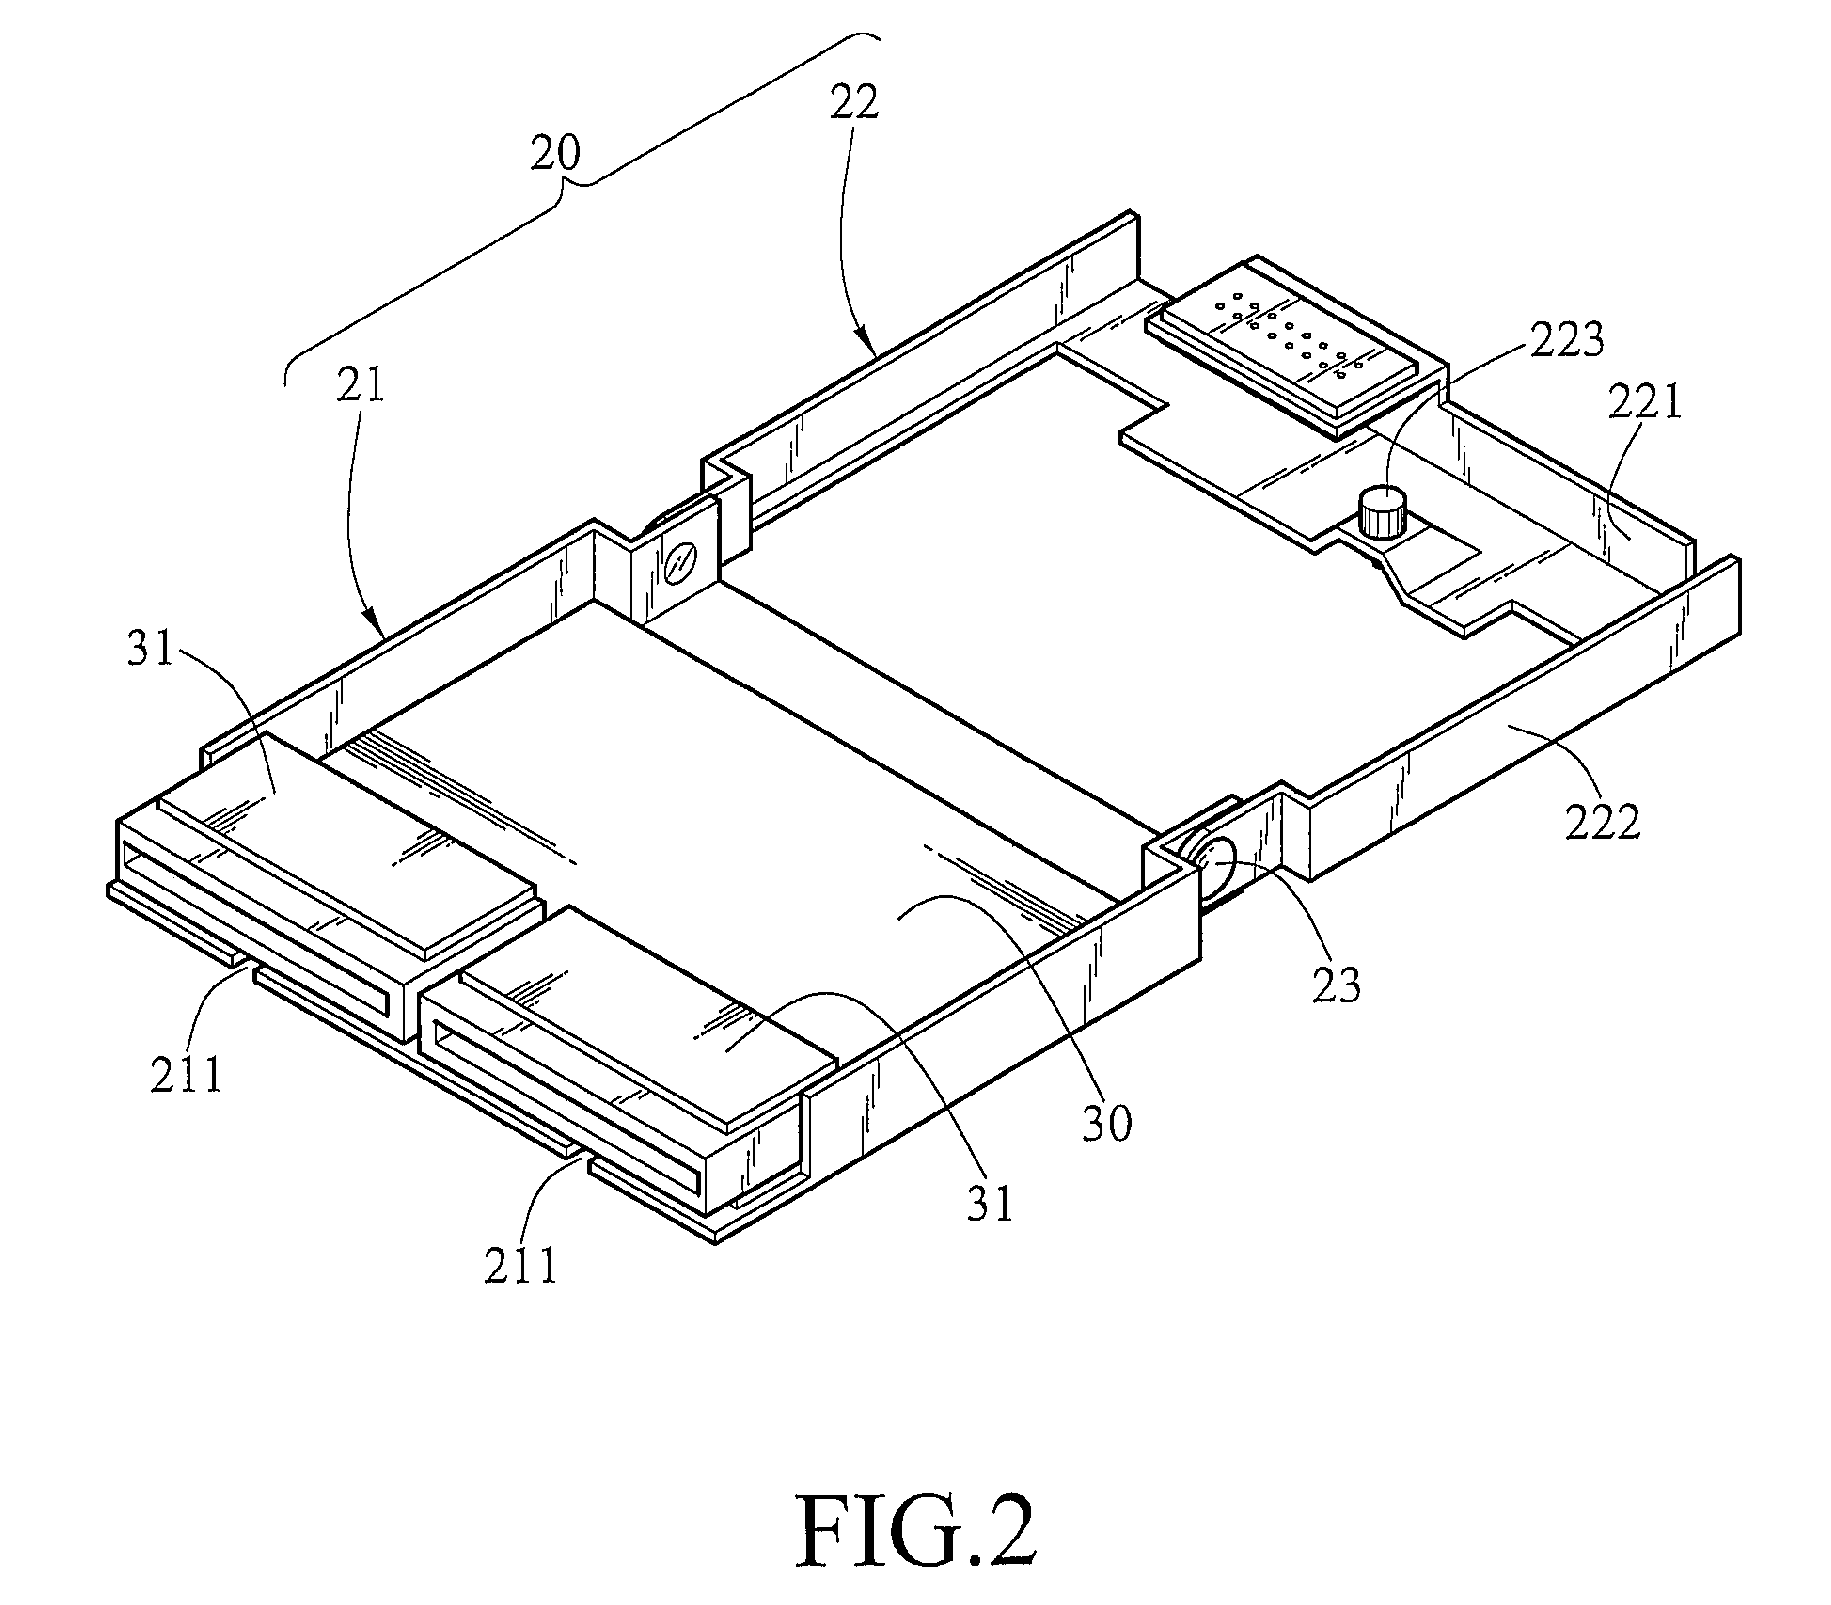 Chassis structure with interface card bracket